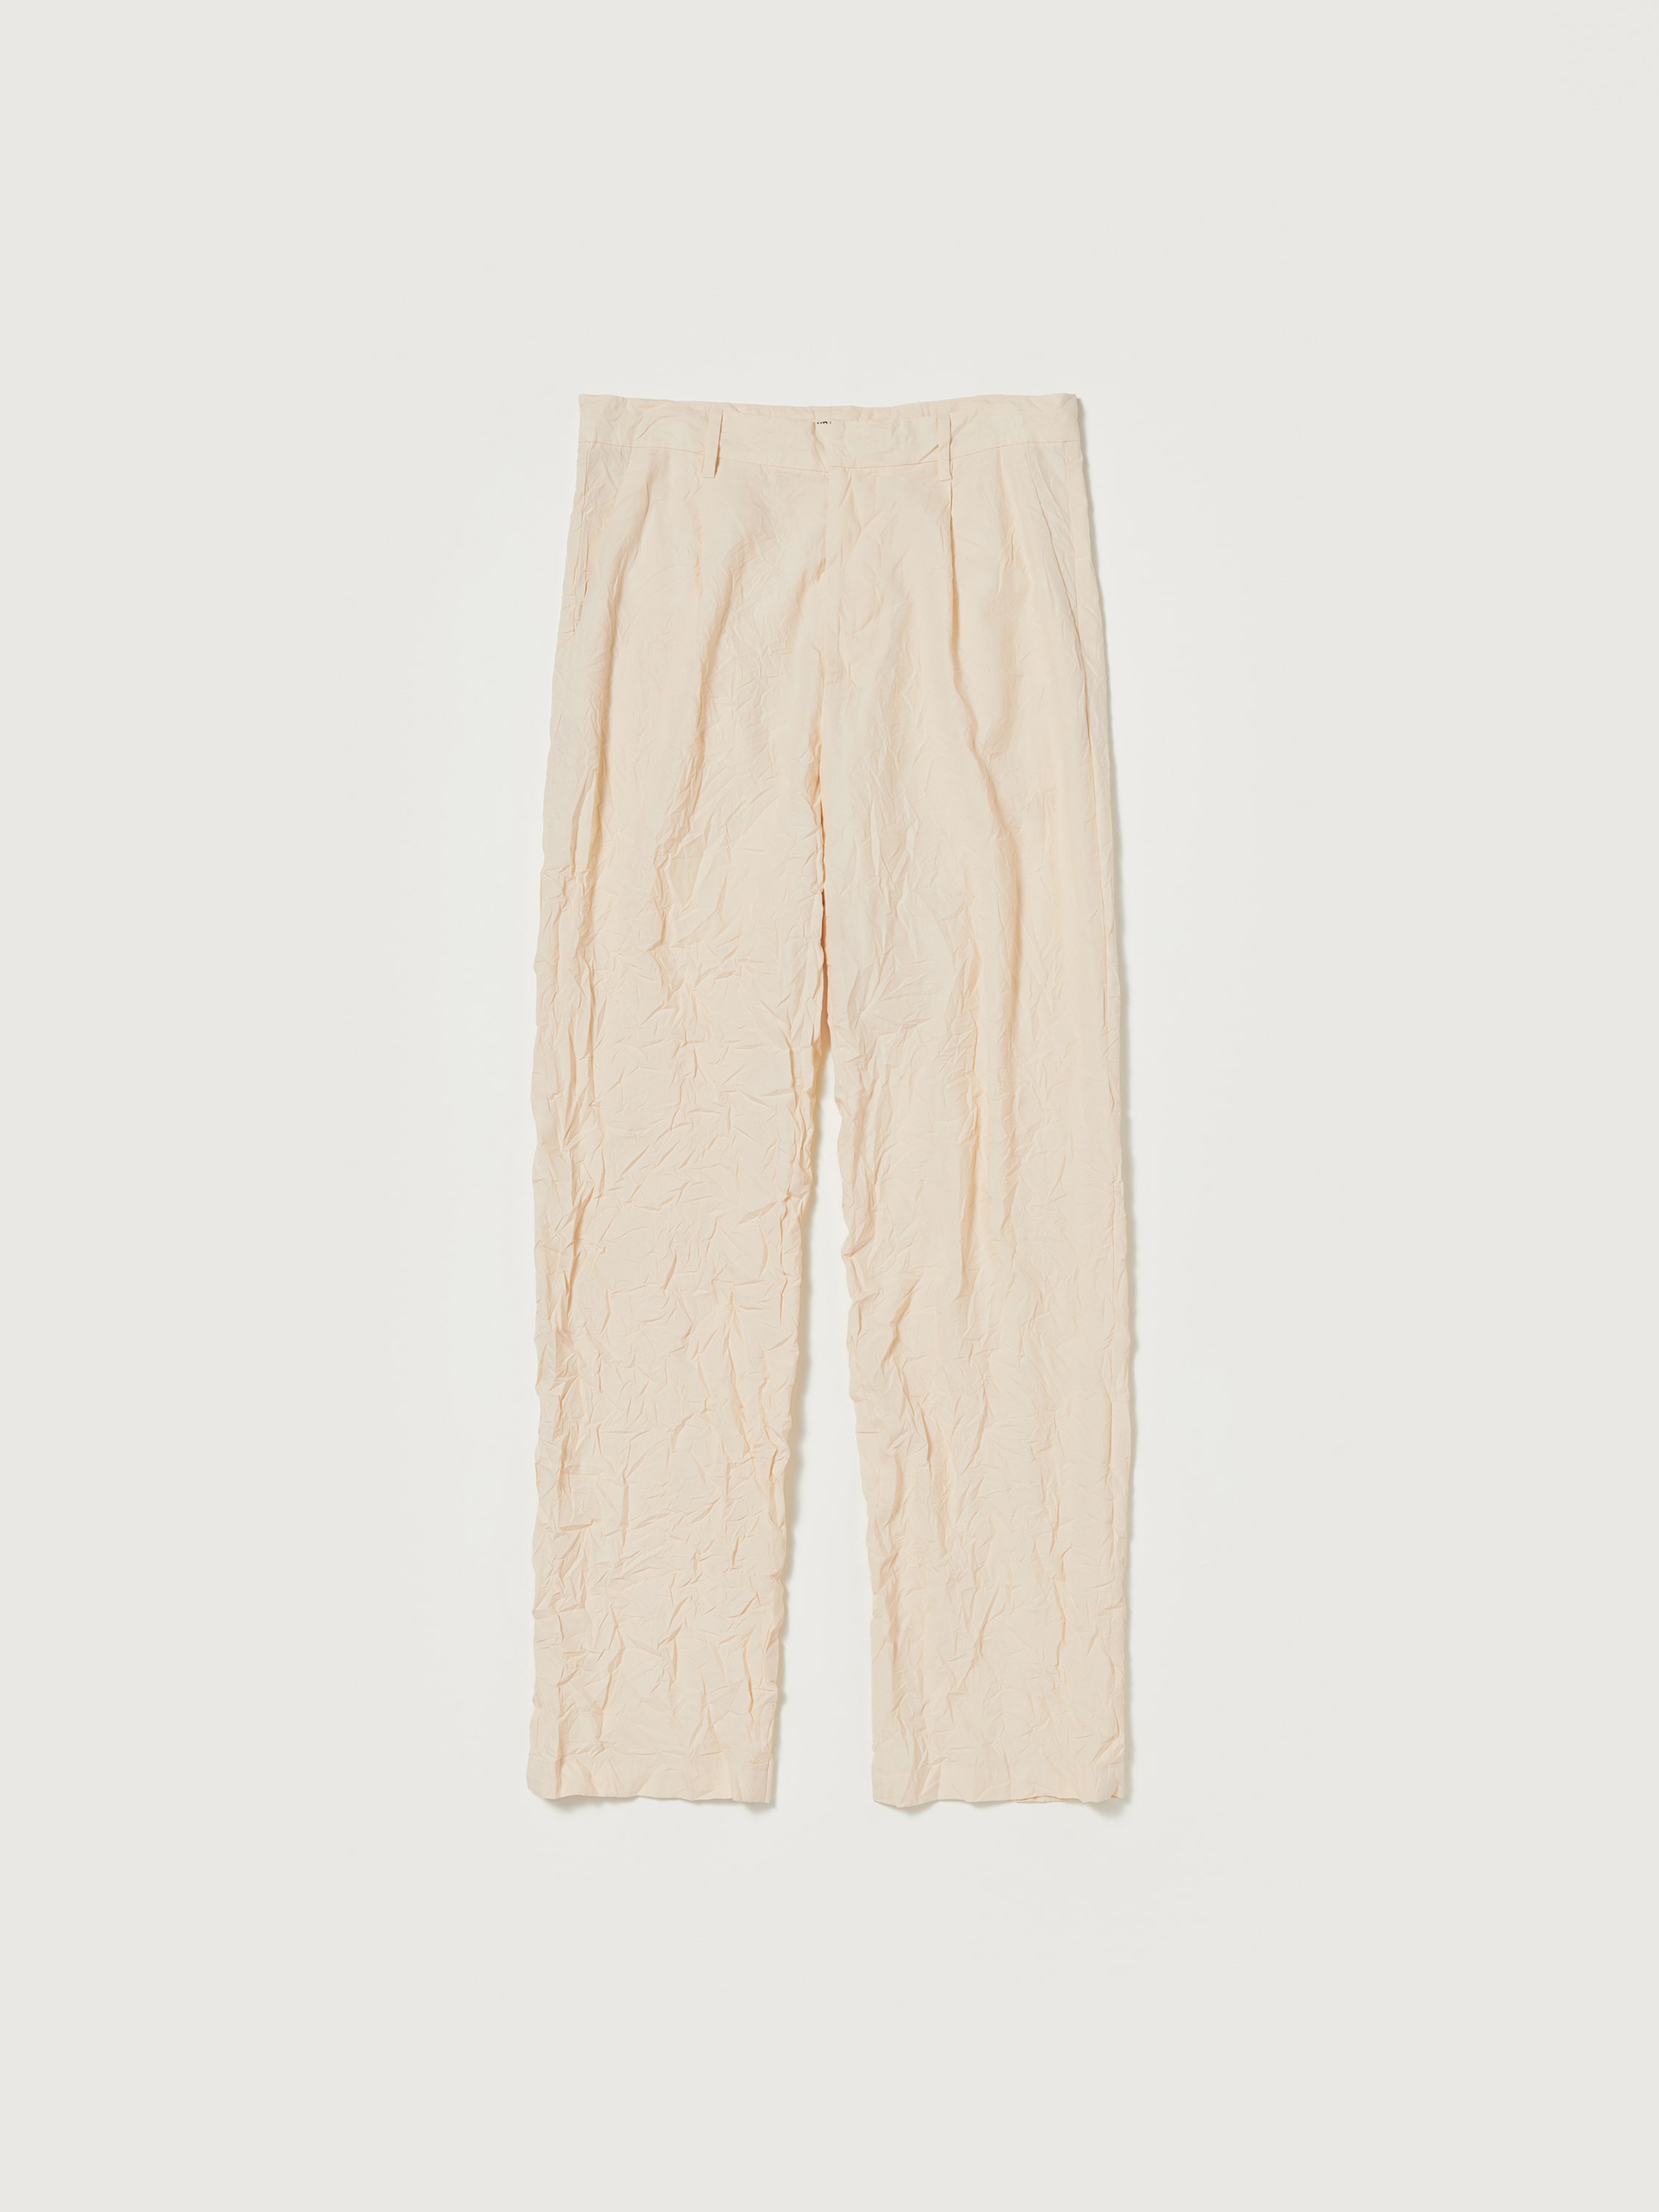 WRINKLED WASHED FINX TWILL PANTS - AURALEE Official Website